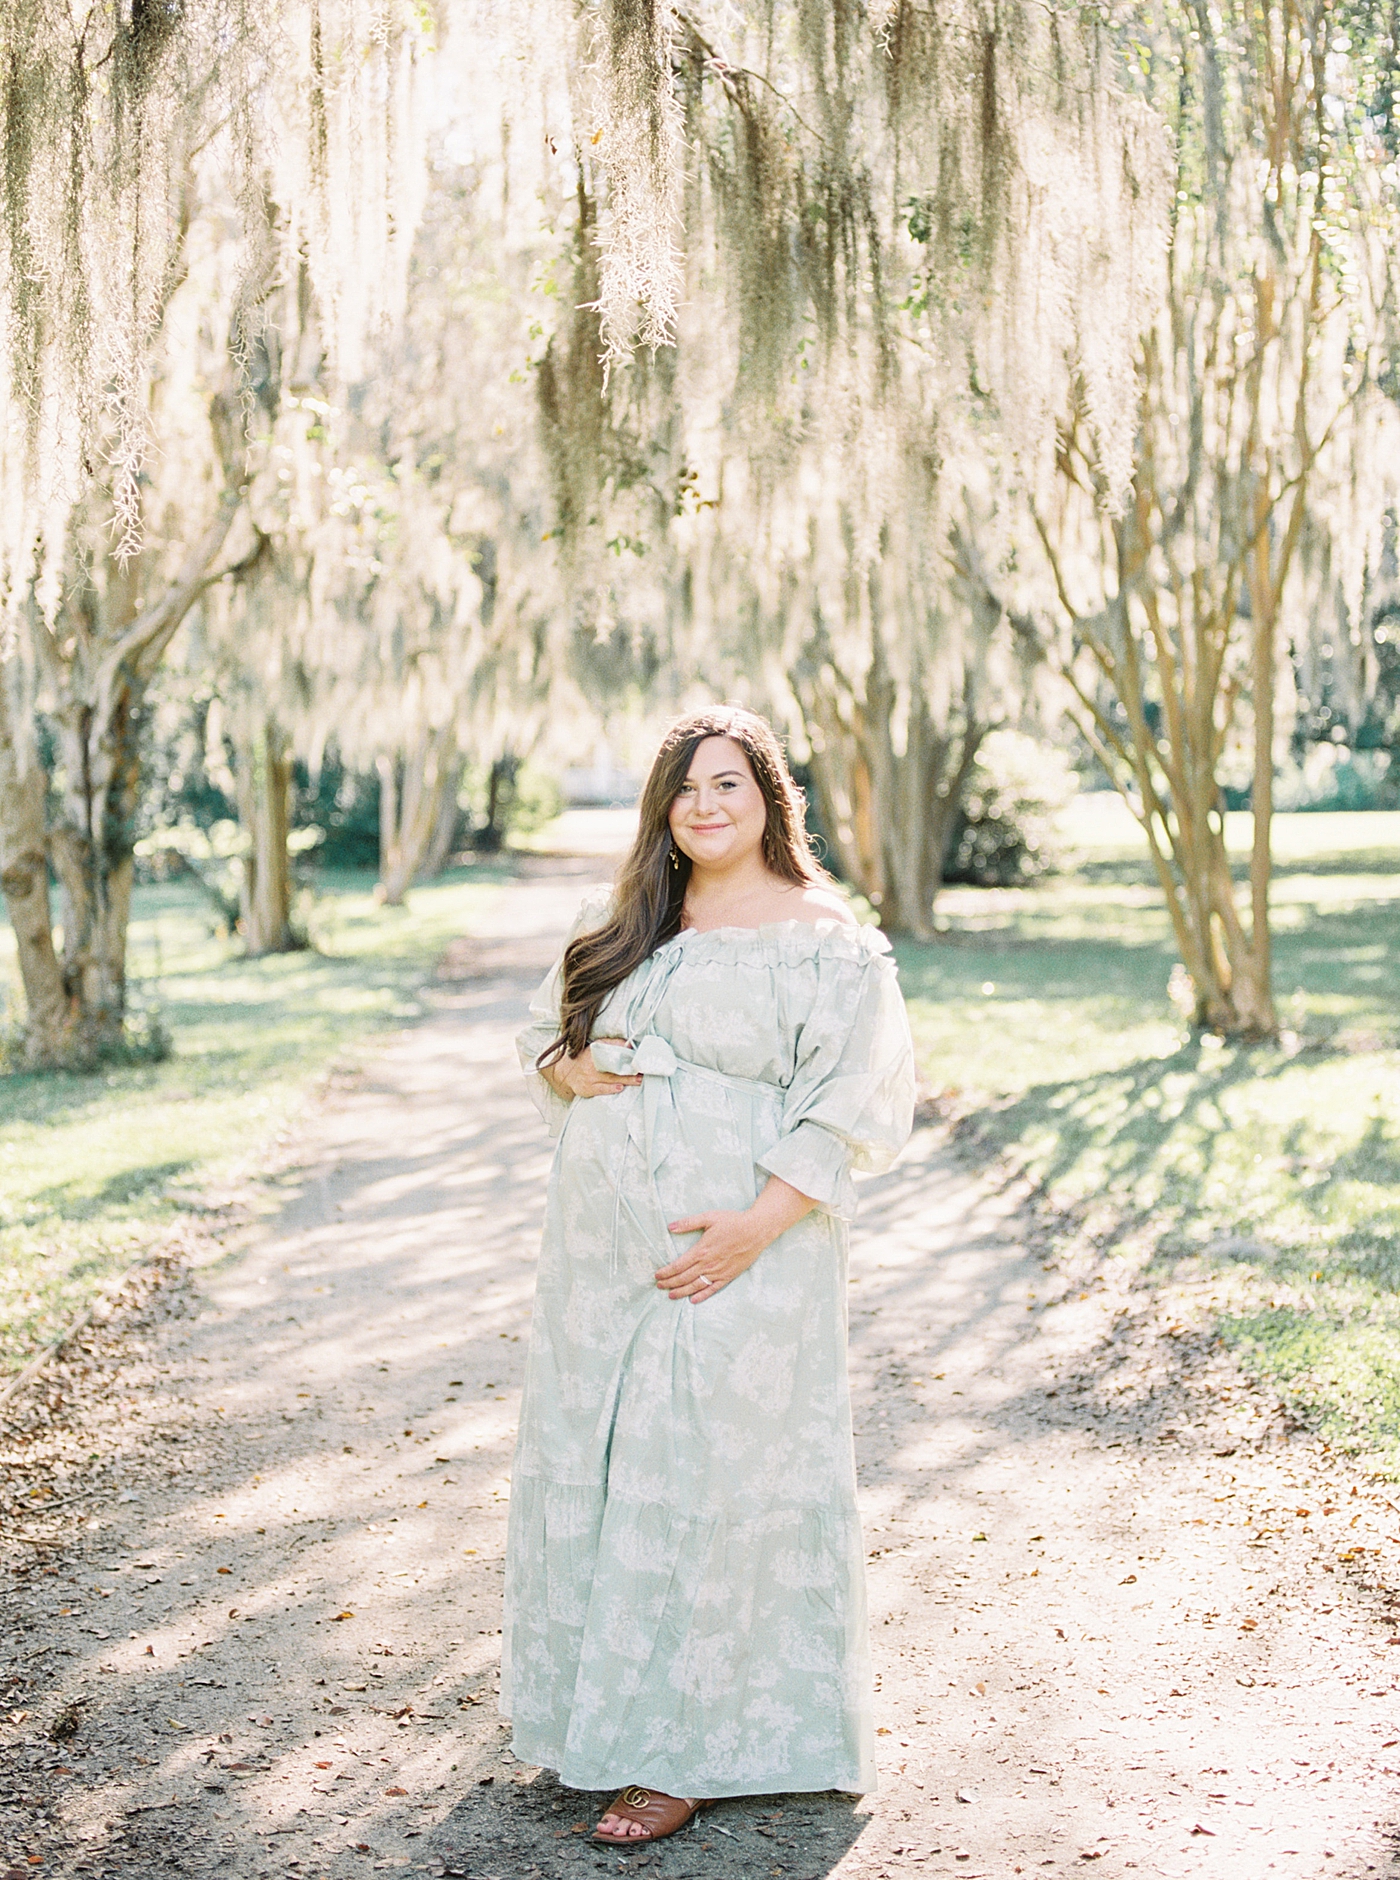 Expecting mother in a green off-the-shoulder spring dress smiling, looking at the camera, and holding her pregnant belly under oak tree-lined pathway during Spring Babymoon in Charleston | Image by Caitlyn Motycka 